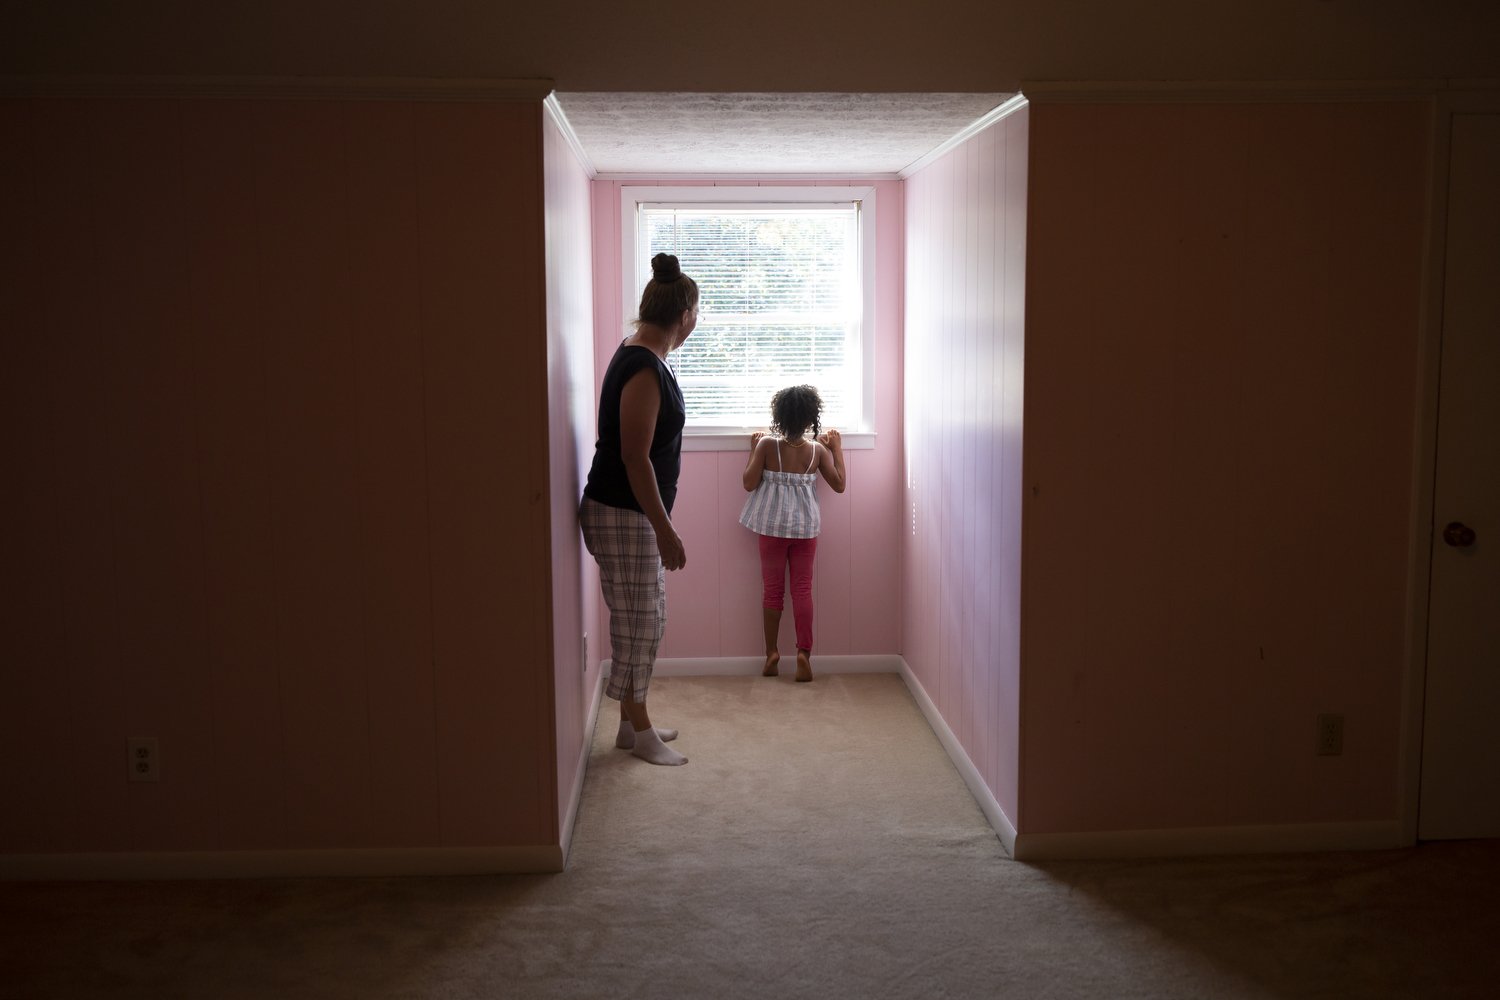  Terri Straka, left, explores her new home with her granddaughter Sophia Raymund, 5, right, in Myrtle Beach, South Carolina. Straka is part of a buyout program to relocate Horry County residents away from flood prone areas and into safer homes.  For 